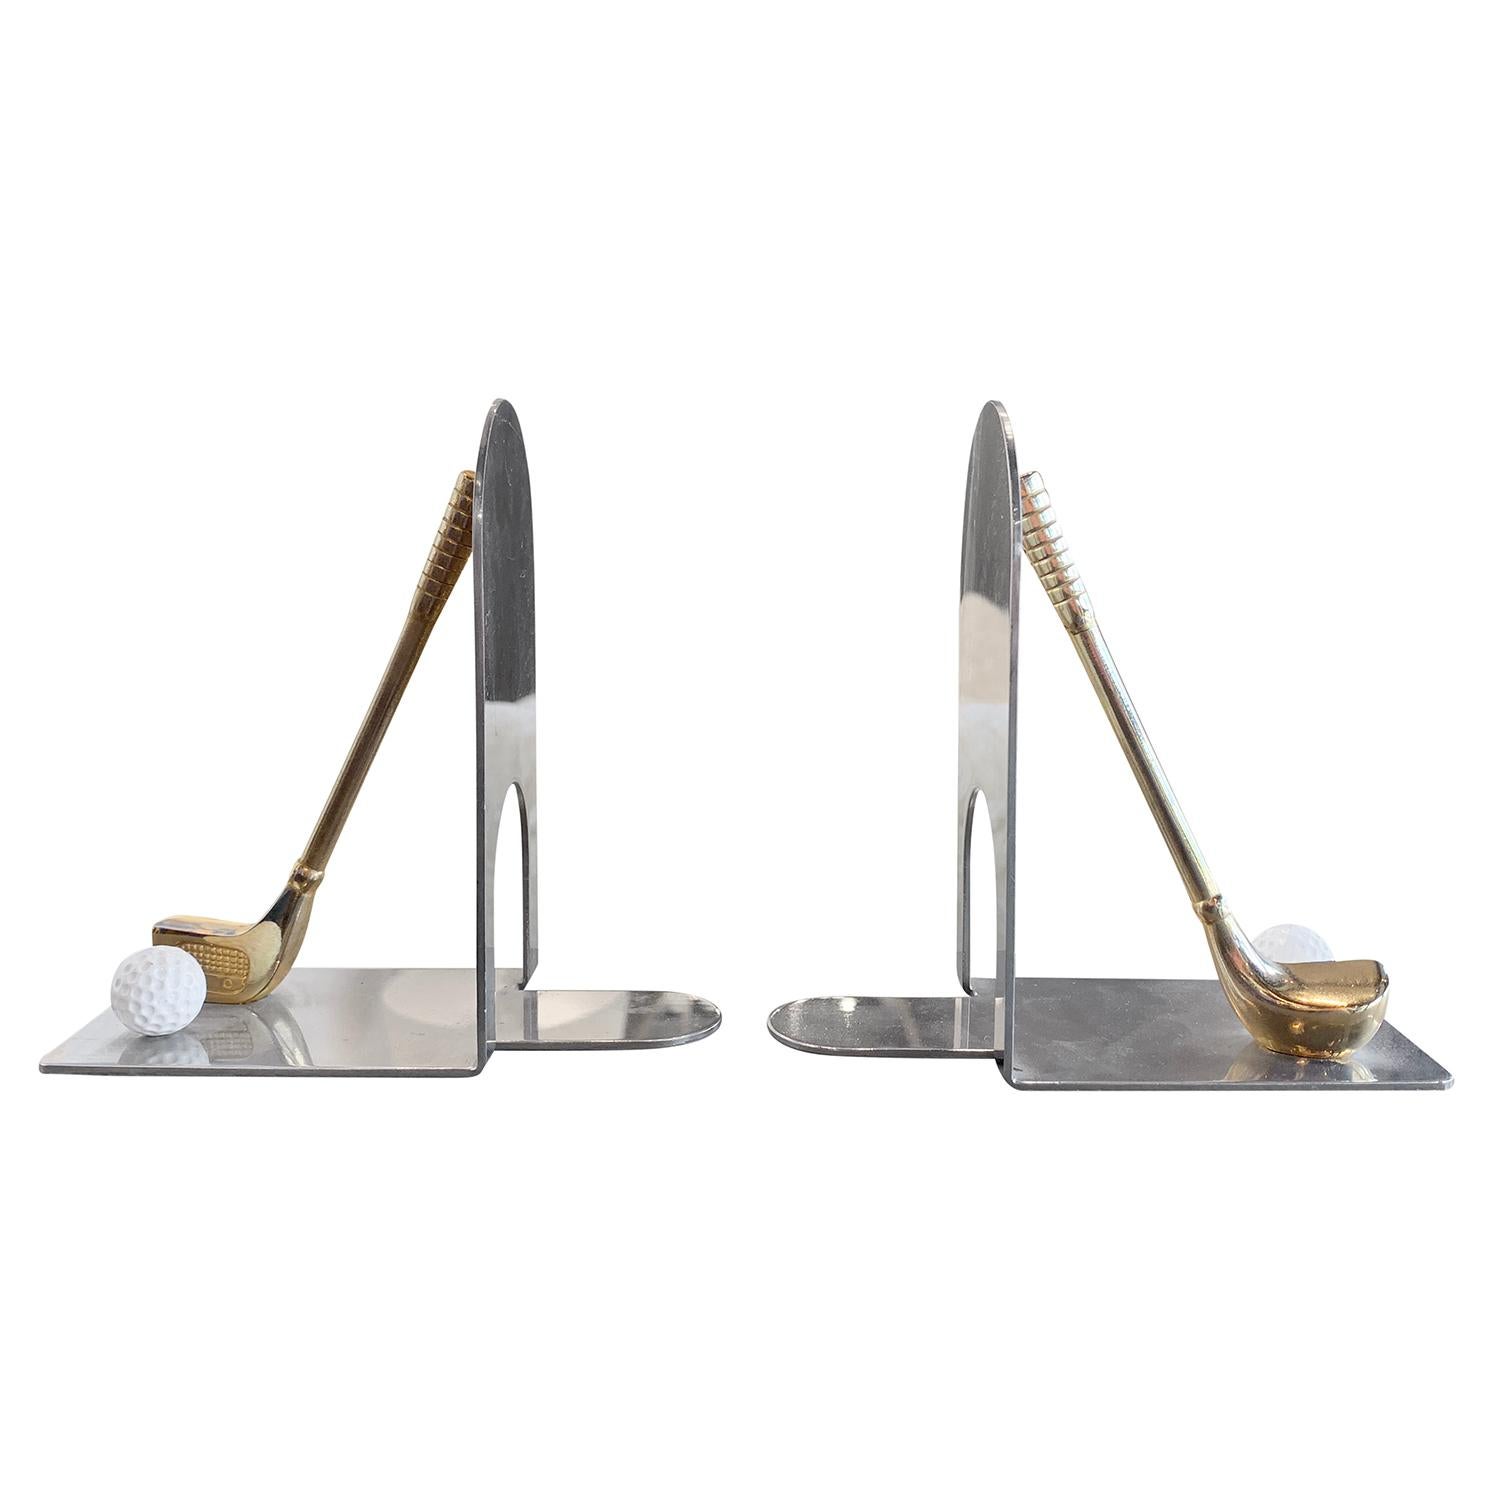 A silver, vintage Mid-Century Modern Italian pair of bookends made of hand crafted chromed metal and brass, depicting a golf ball, in good condition. Wear consistent with age and use, circa 1960, Italy.